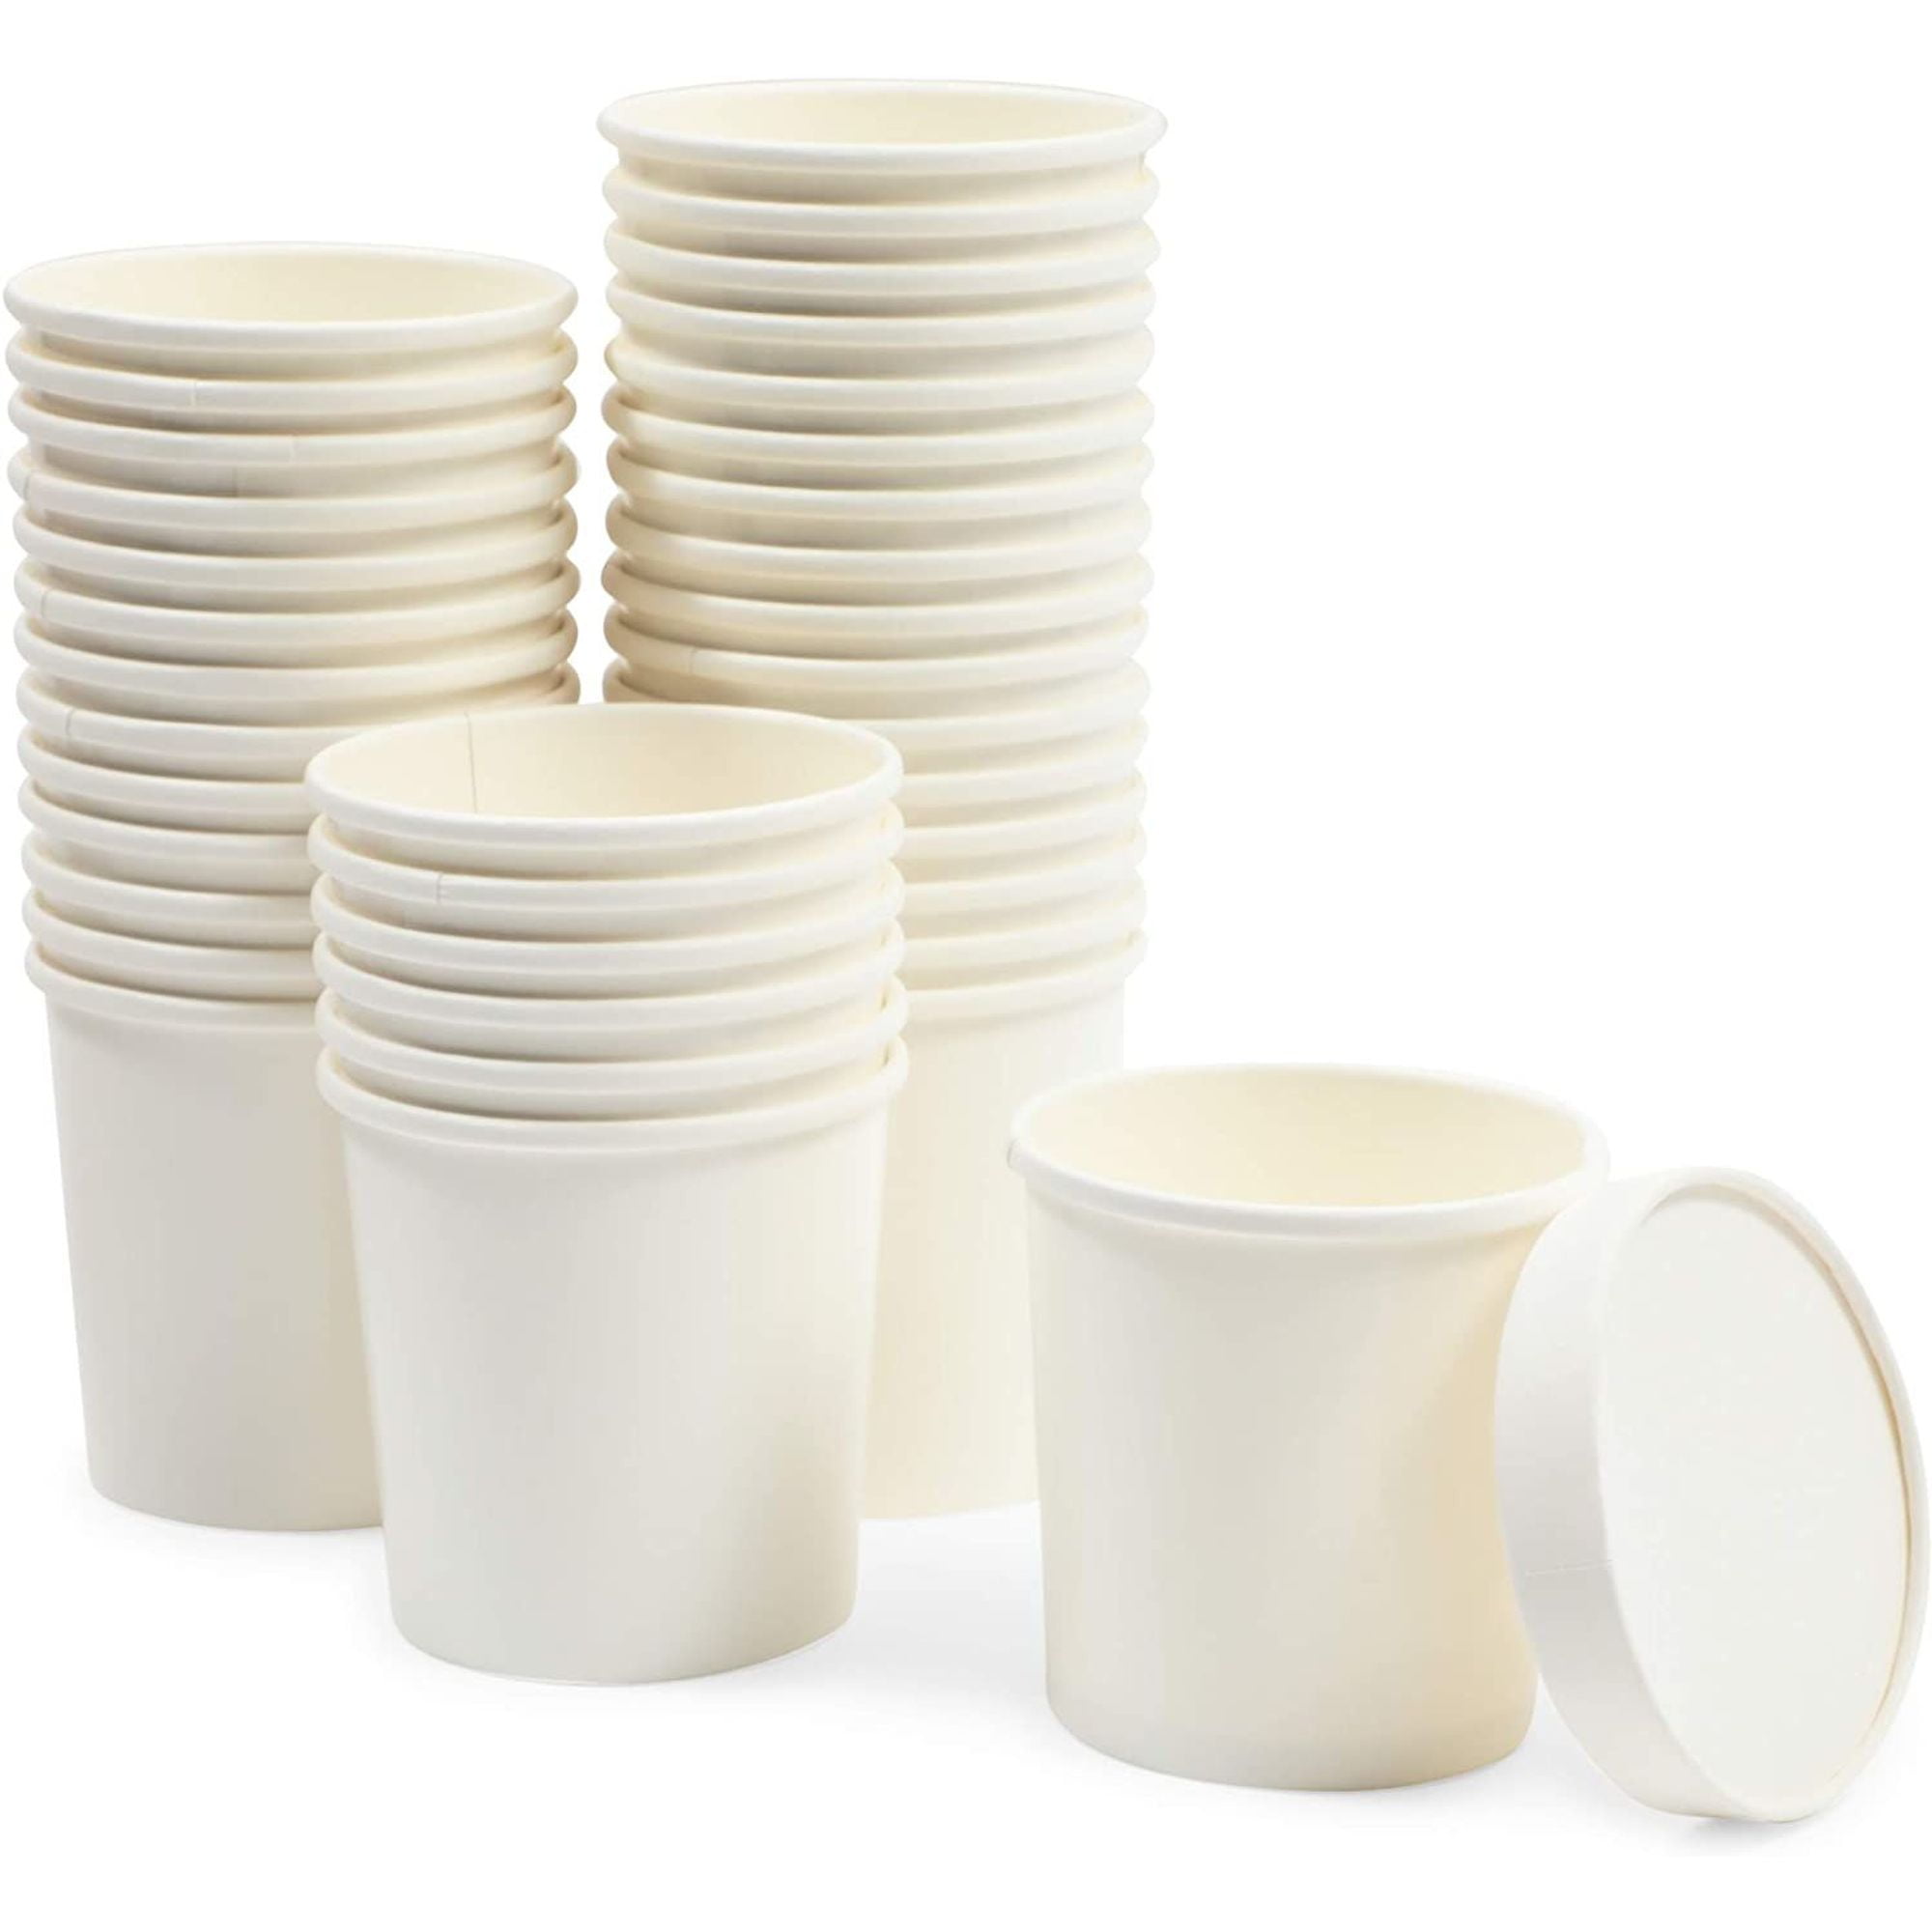 36 Pack 16 oz Disposable Soup Containers with Lids, Take Out Cups for